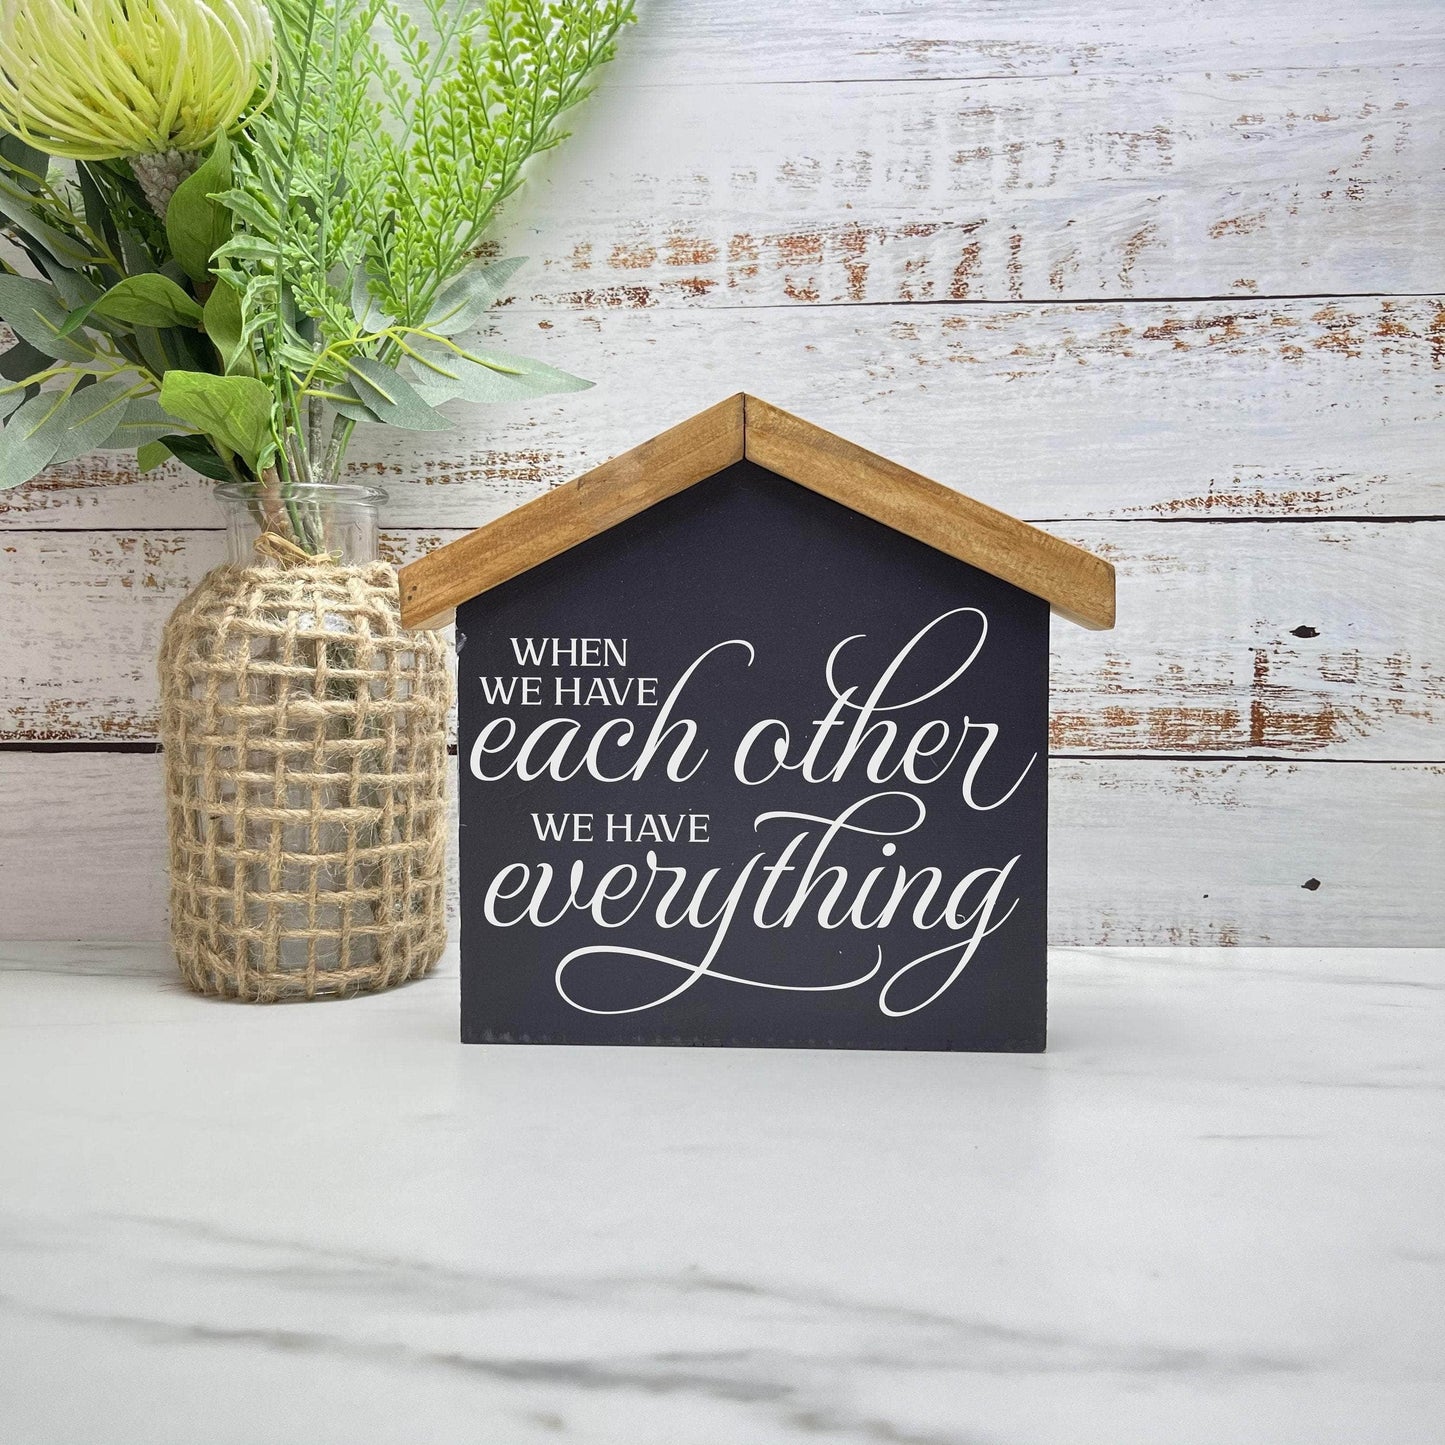 When we have each other House wood sign, love sign, couples gift sign, quote sign, home decor